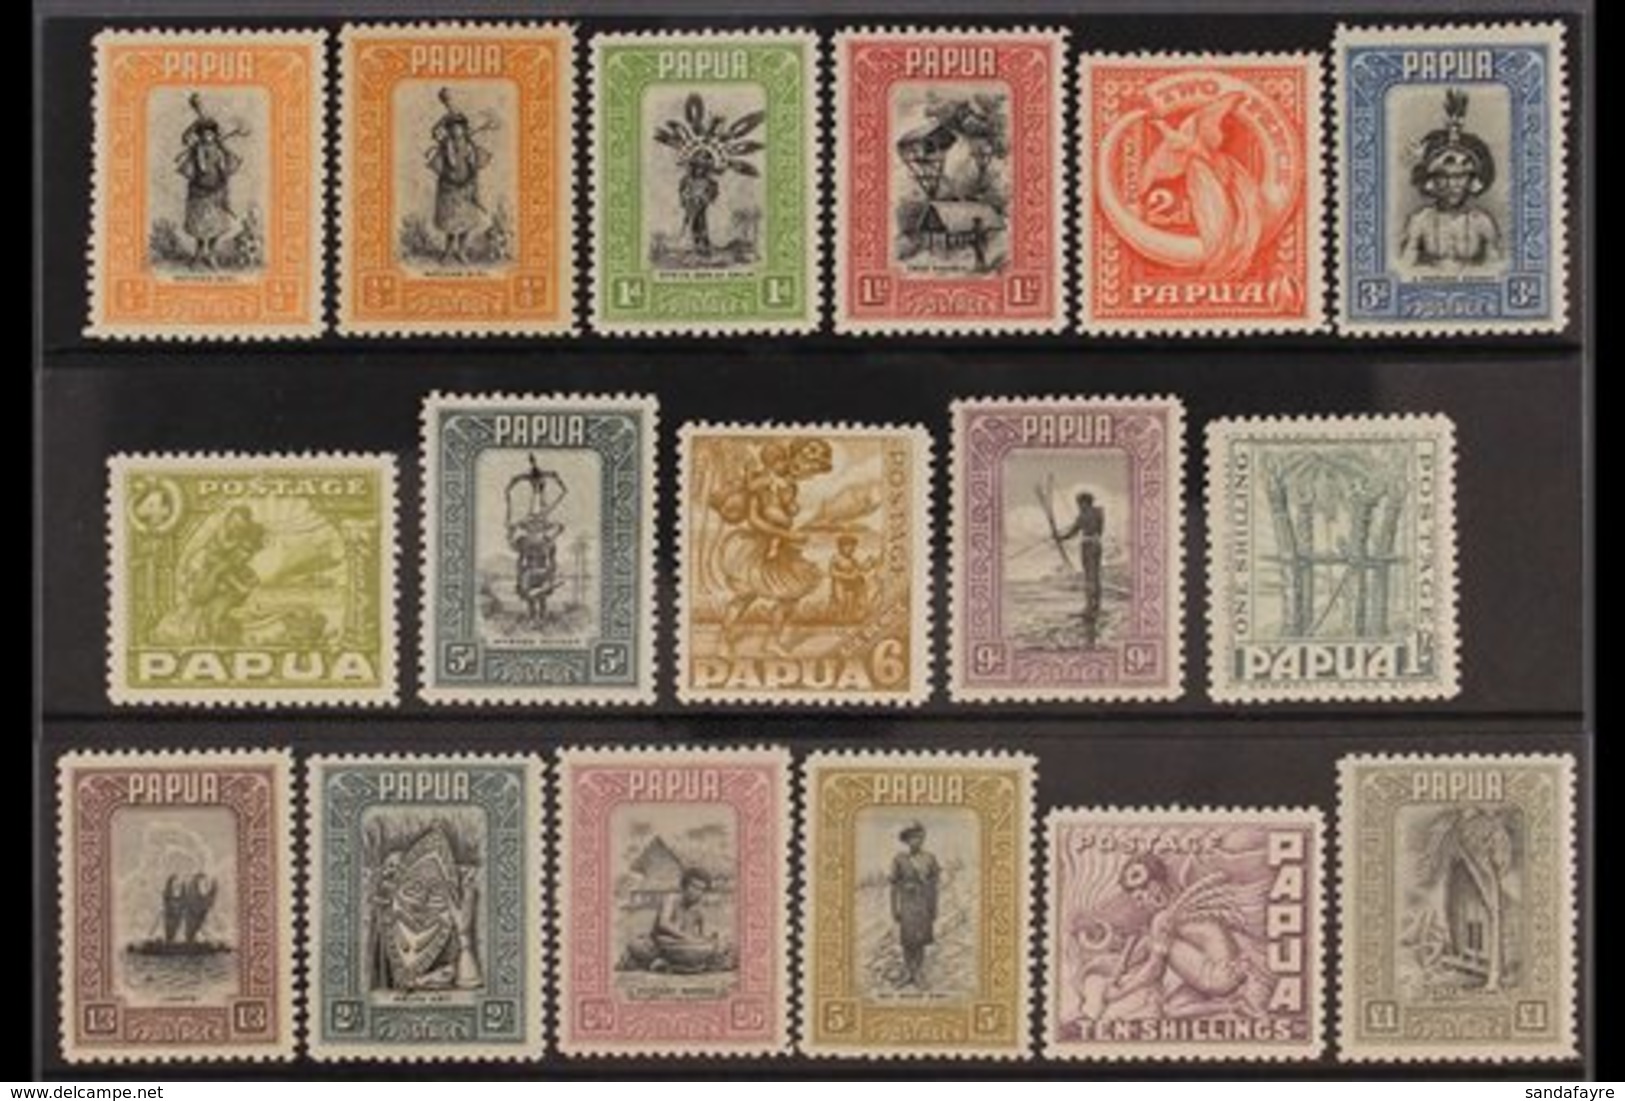 1932-40 Complete Pictorial Definitive Set Including Both ½d Shades, SG 130/145, Mint With Lovely Fresh Colours. (17 Stam - Papua New Guinea